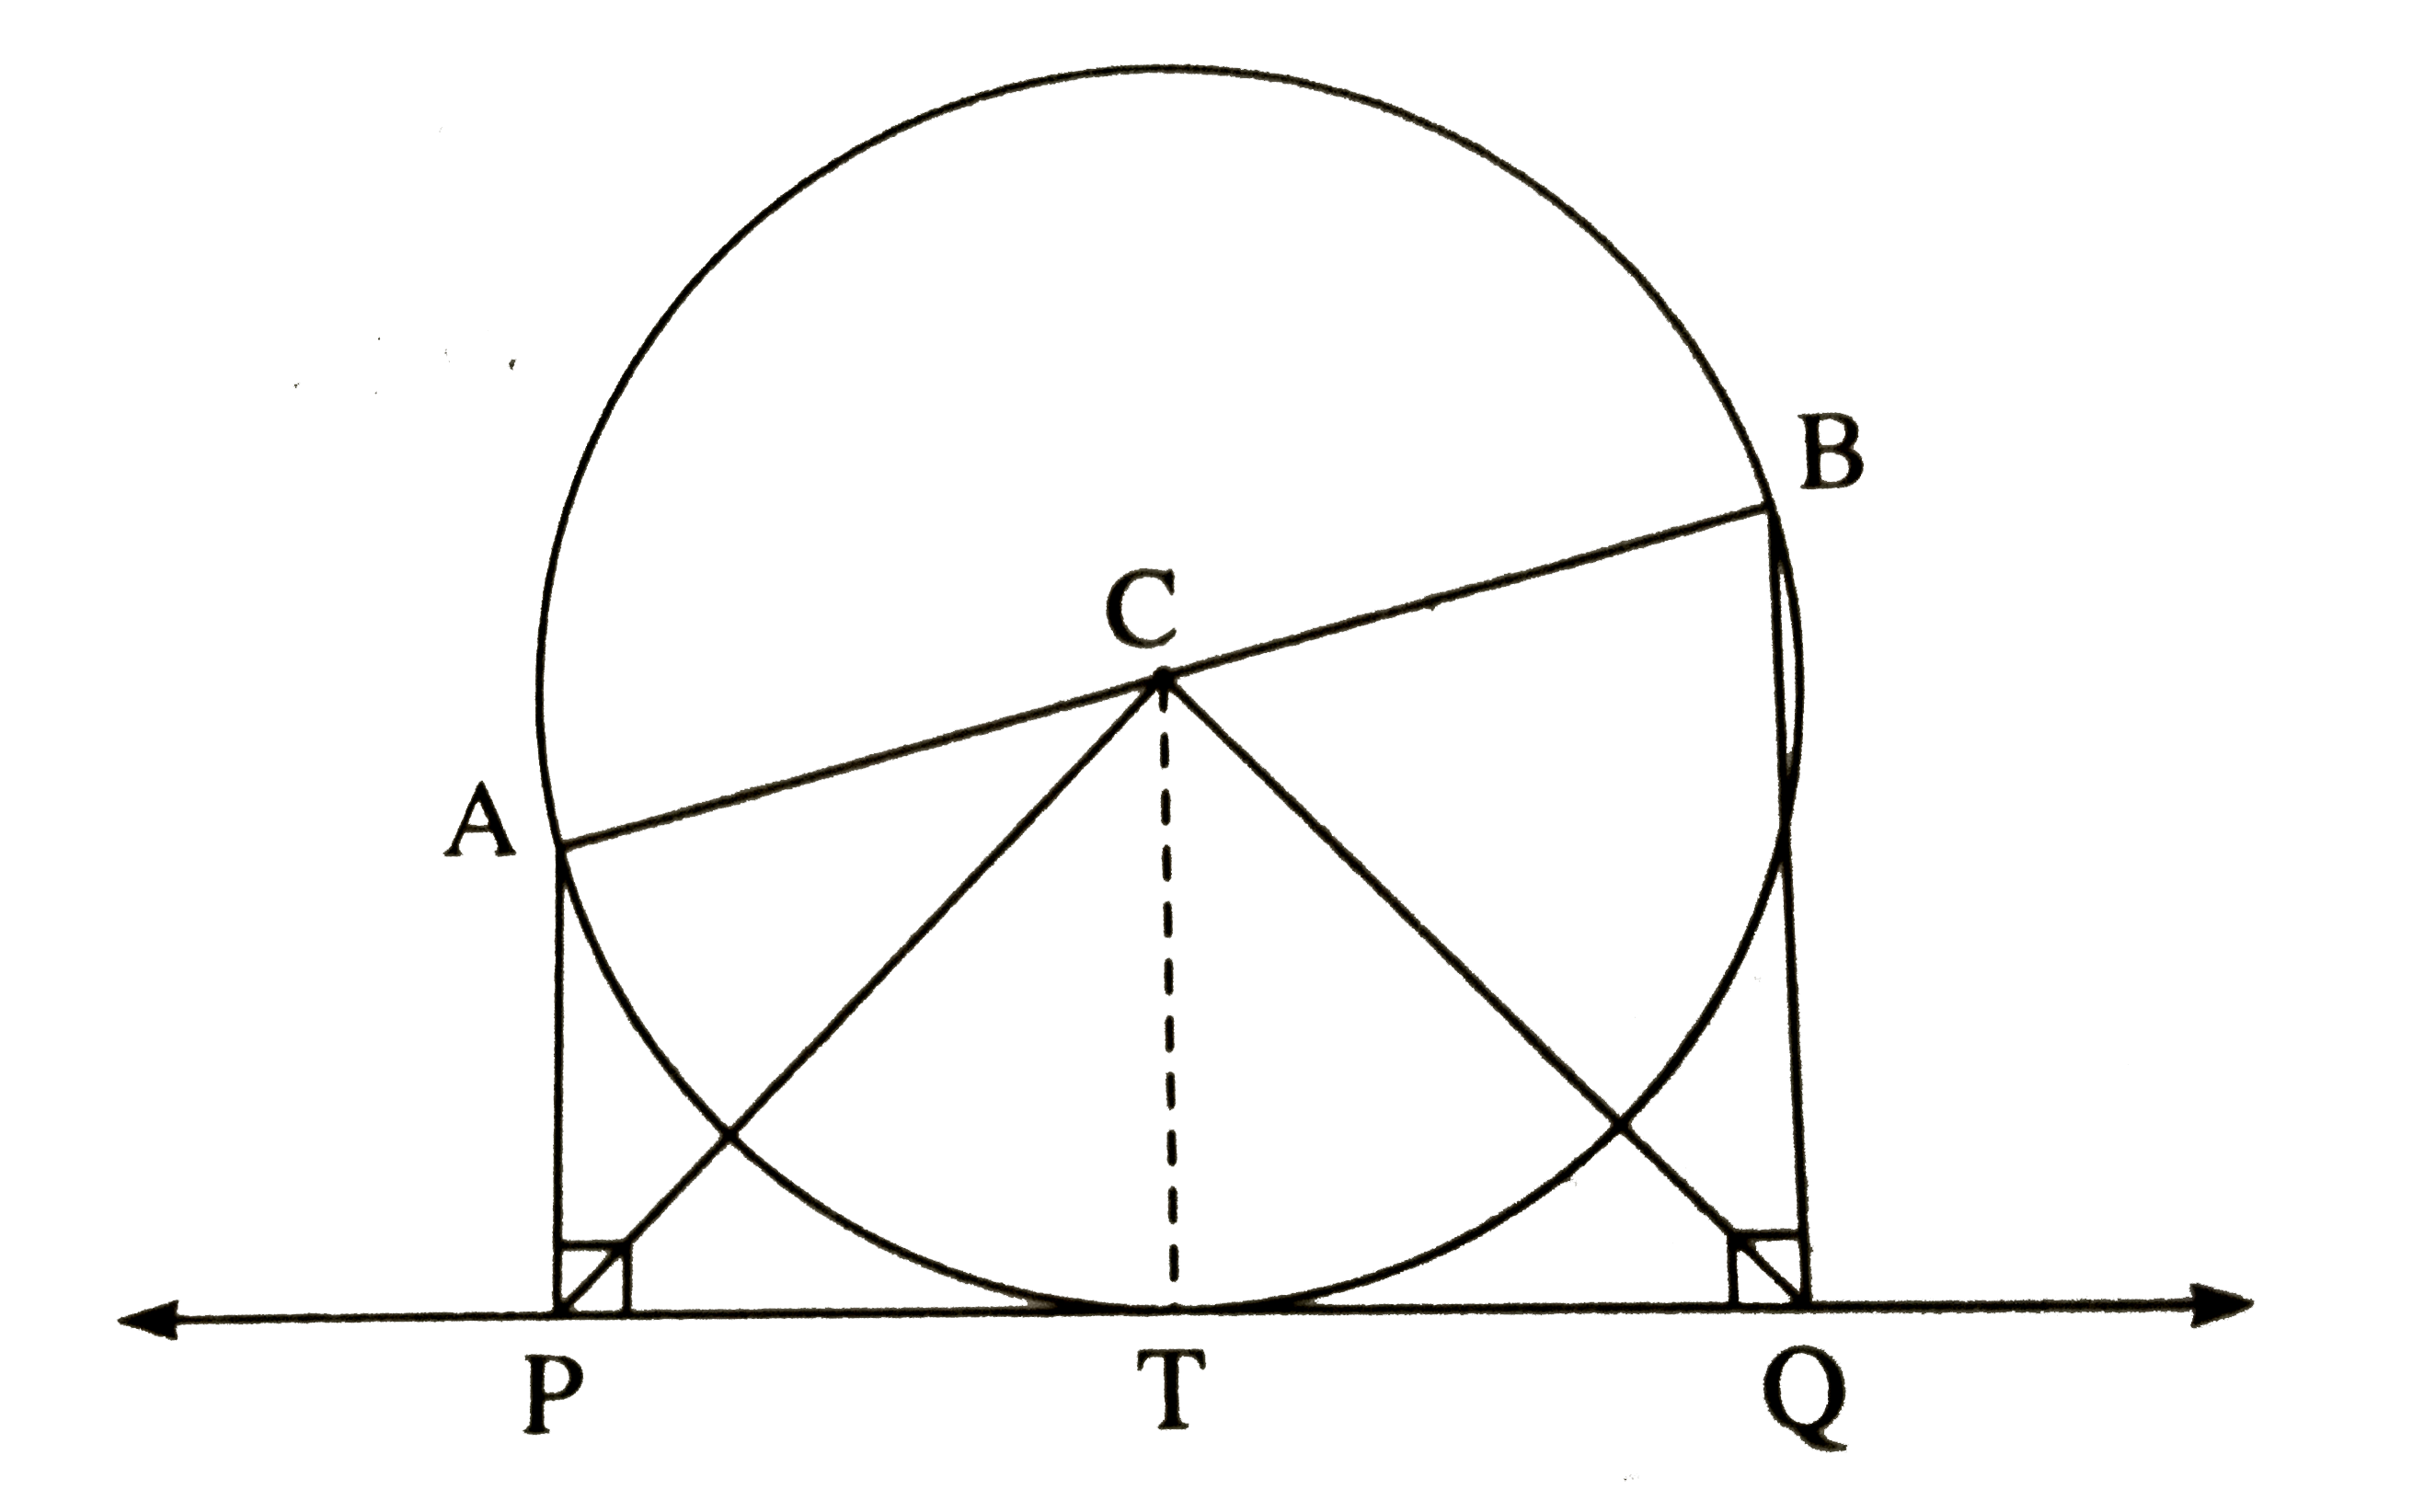 In the figure, seg AB is a diameter of a circle with centre C. Line PQ is a tangent, which touches the circle at point T. seg AP bot line PQ and seg BQ bot line PQ. Prove that, seg CP cong seg CQ.